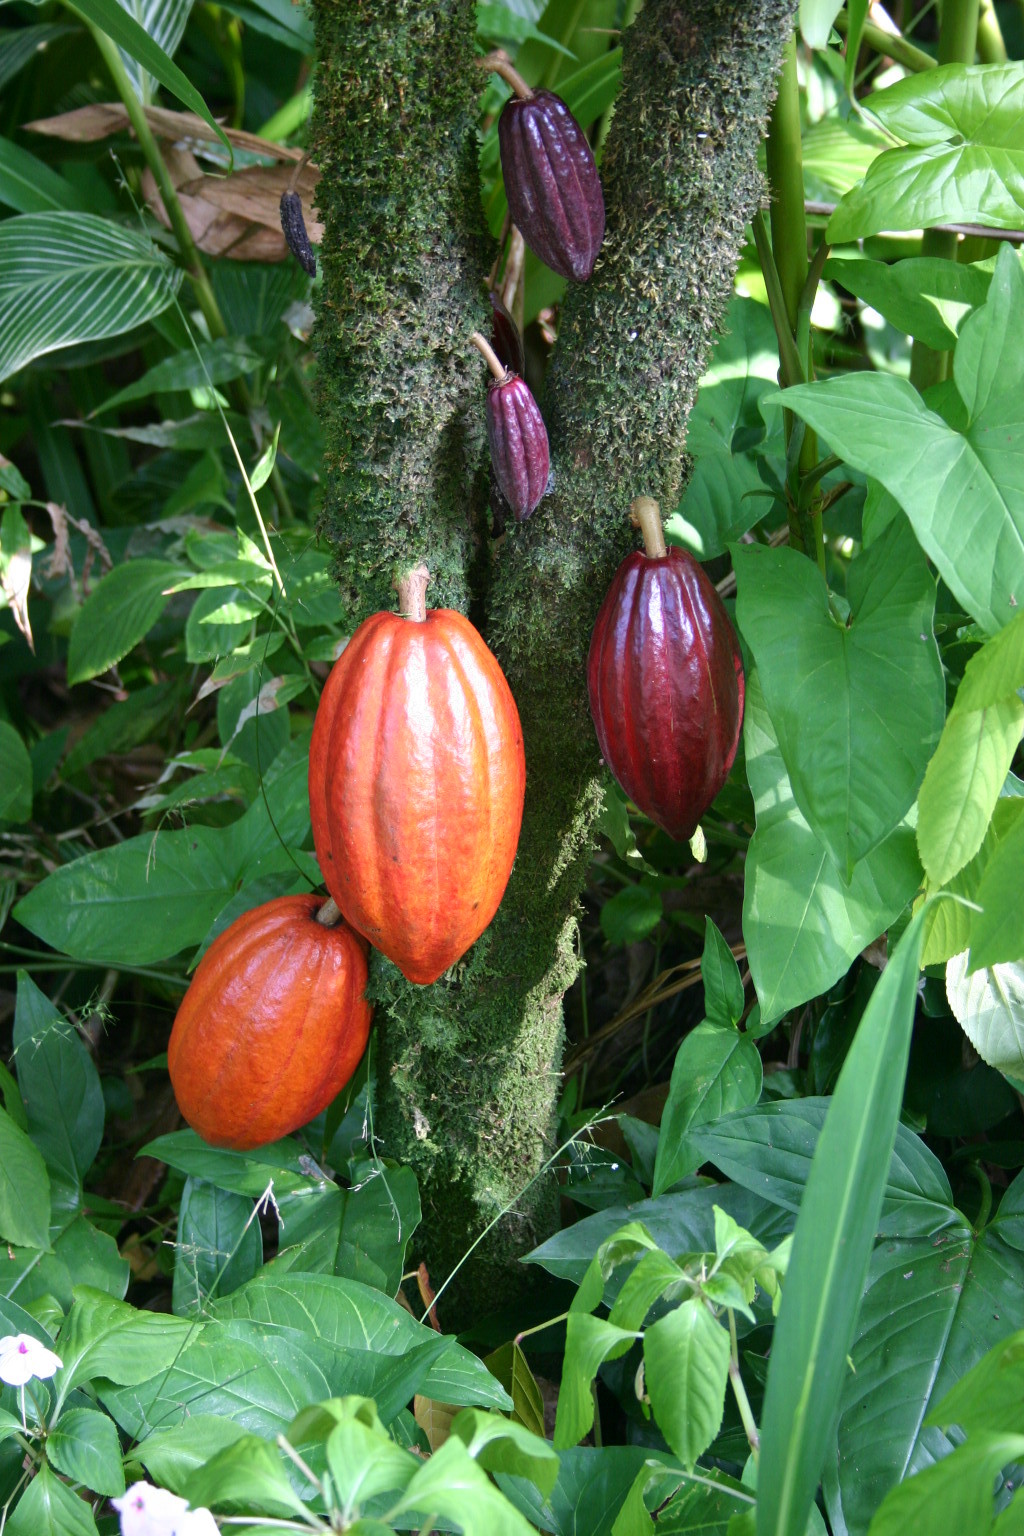 By Photo by Medicaster. - en:Image:Cocoa Pods.JPG, Public Domain, https://commons.wikimedia.org/w/index.php?curid=2973927